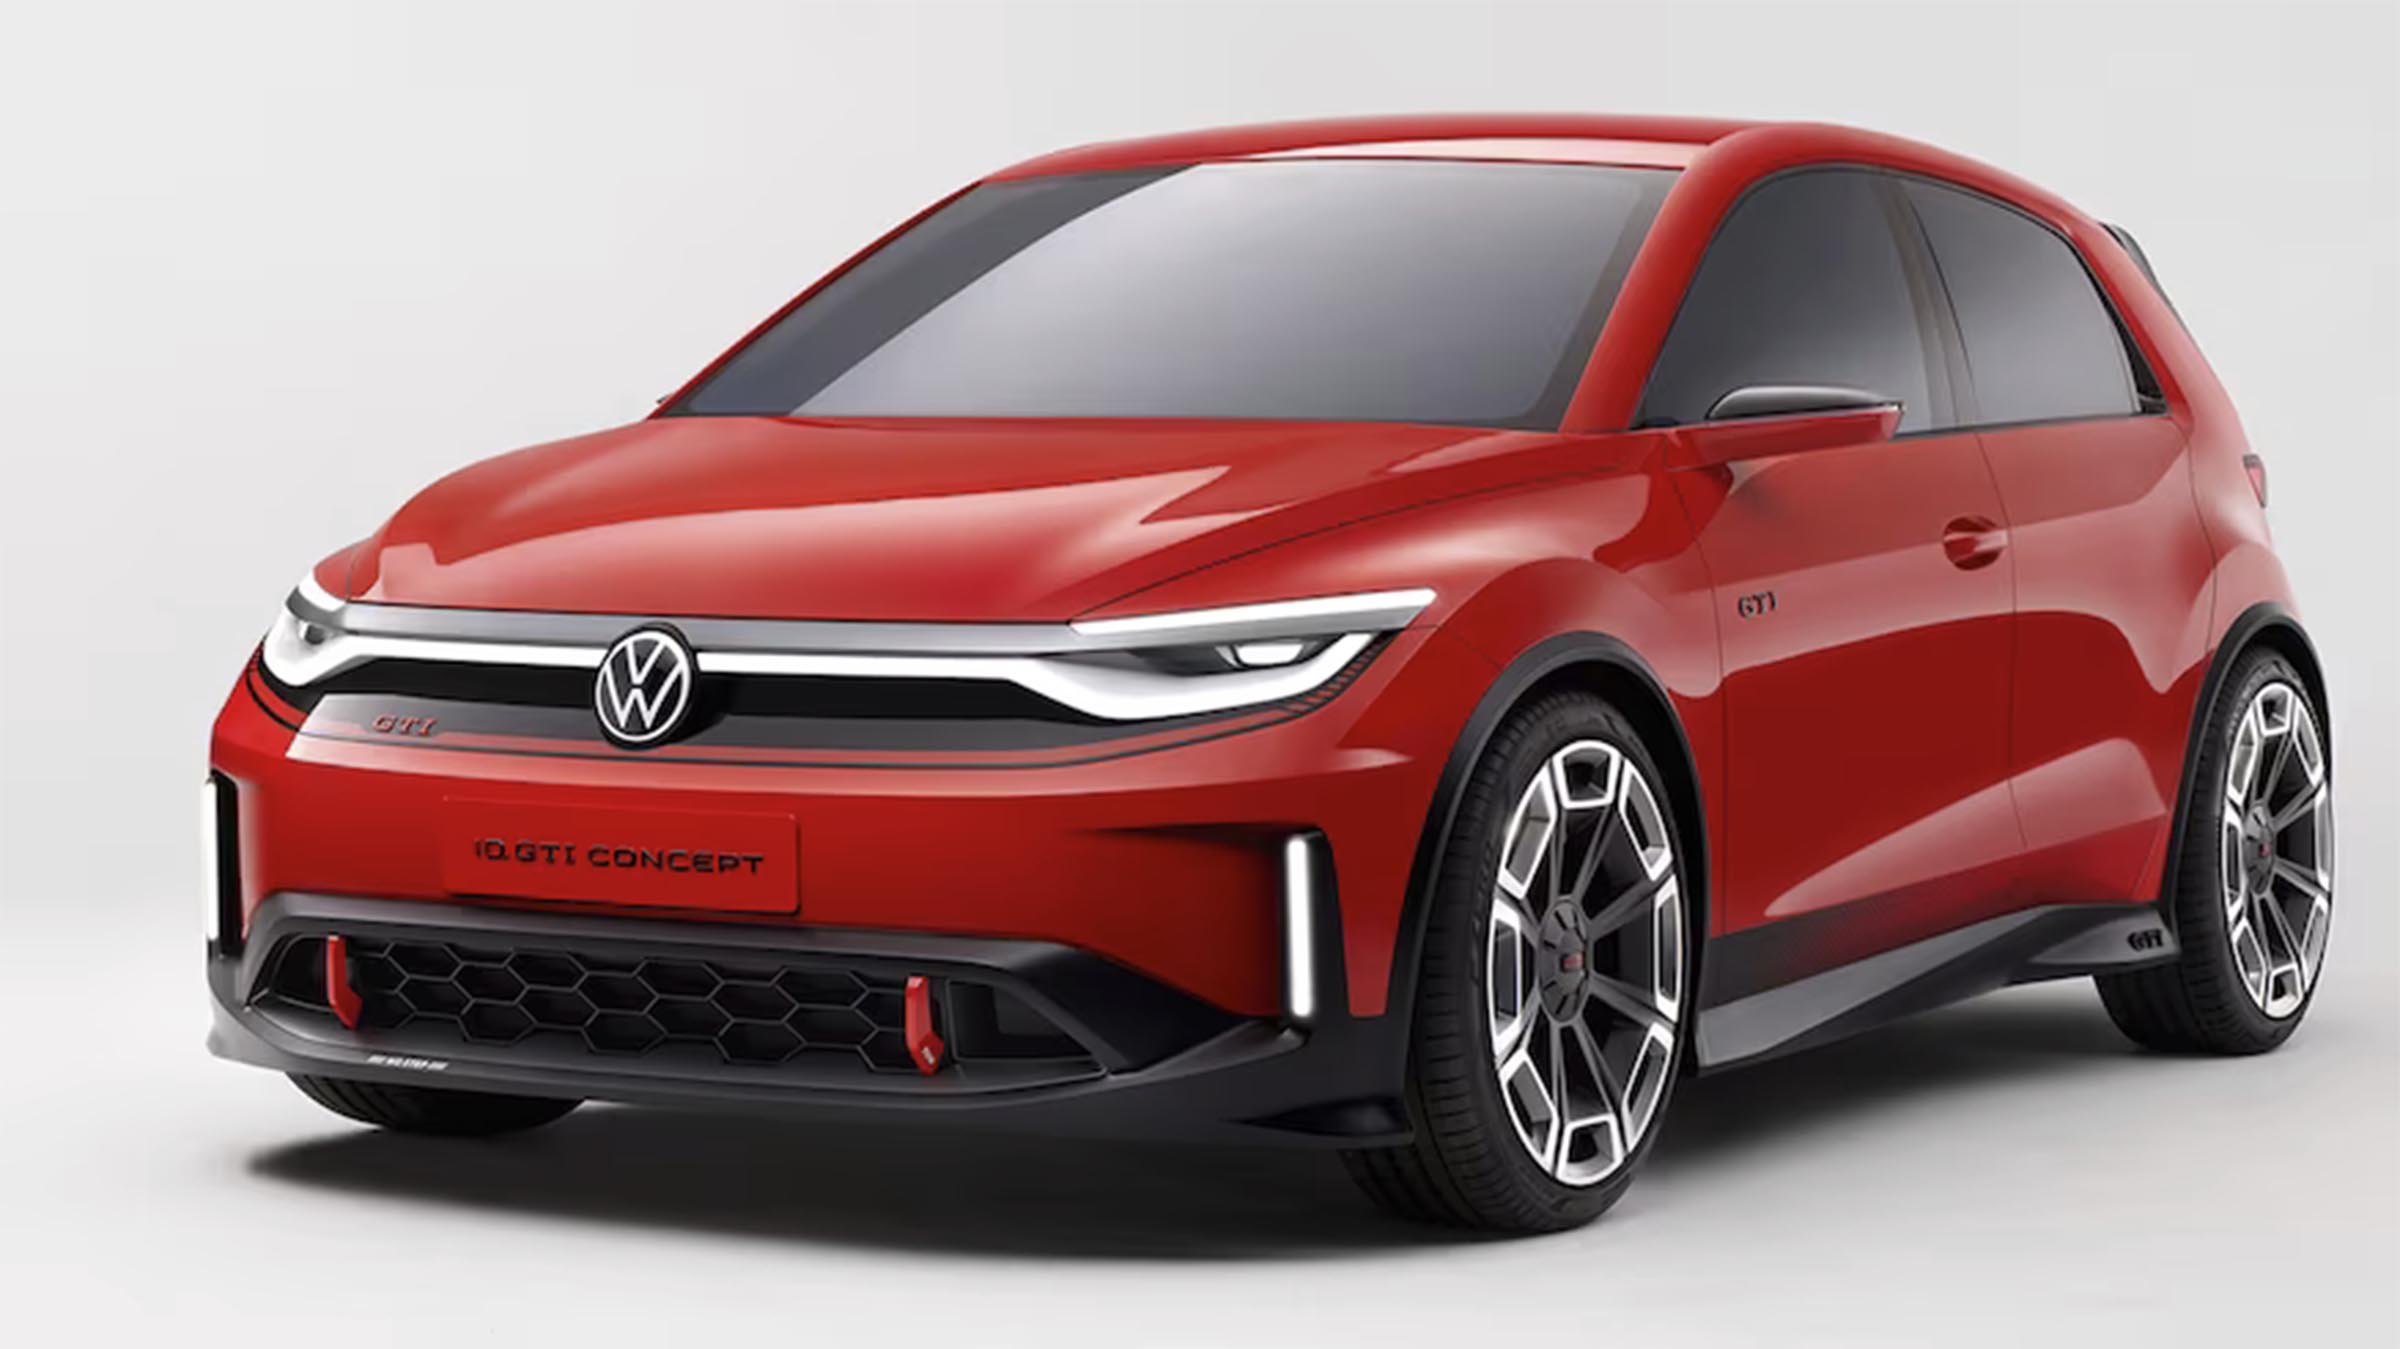 VW ID GTI Concept - front 3-4